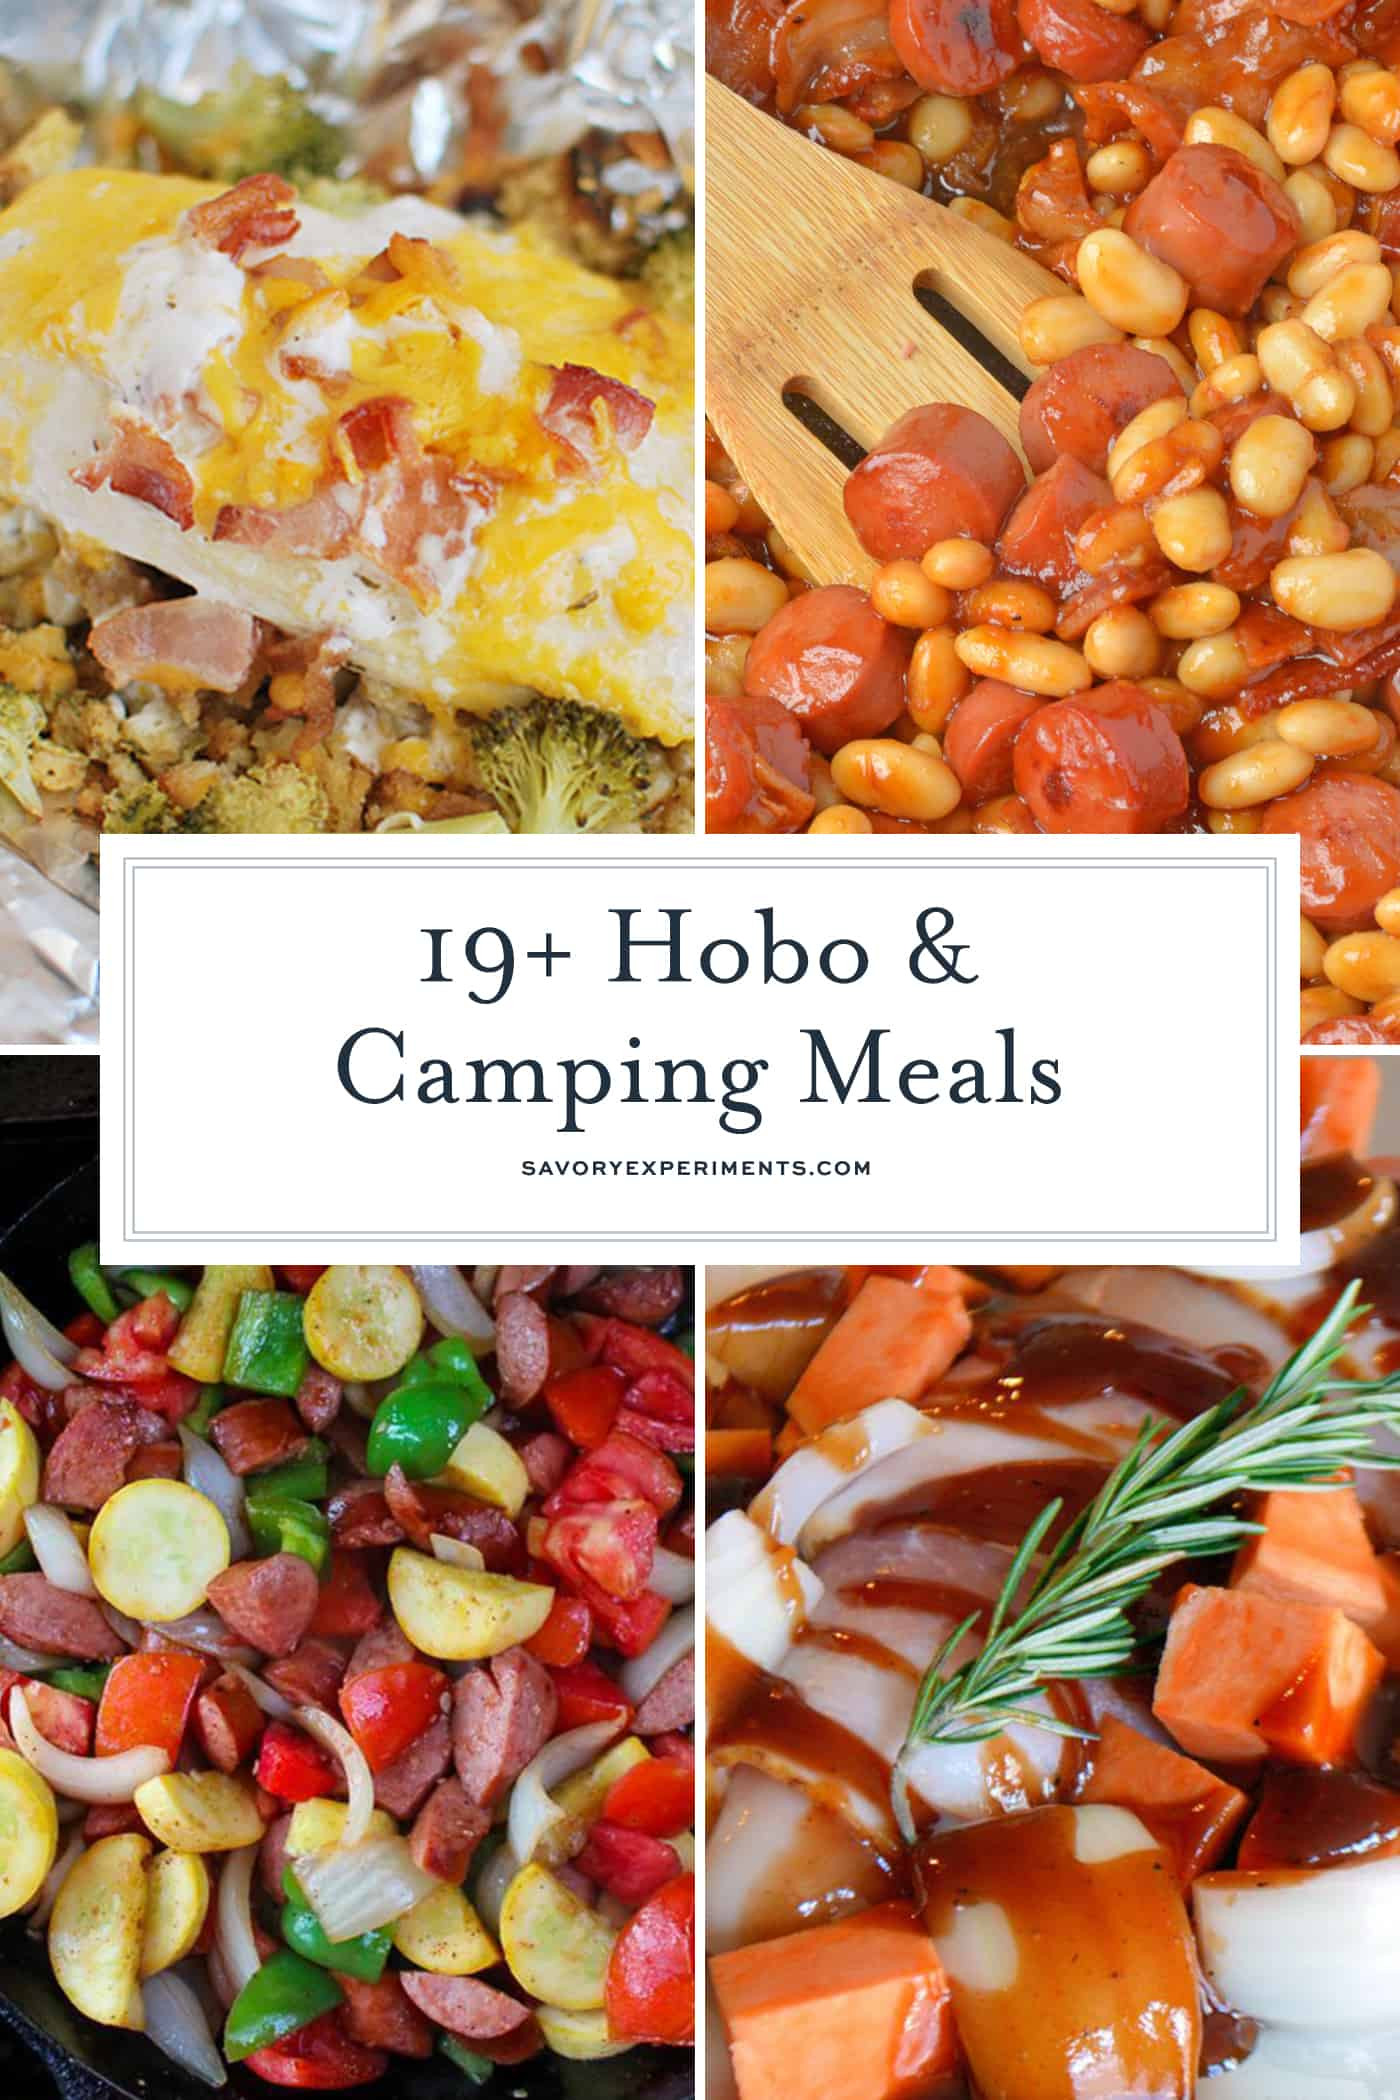 Easy Camping Dinner Ideas
 20 Best Hobo Meals and Camping Recipes Recipes for Camping